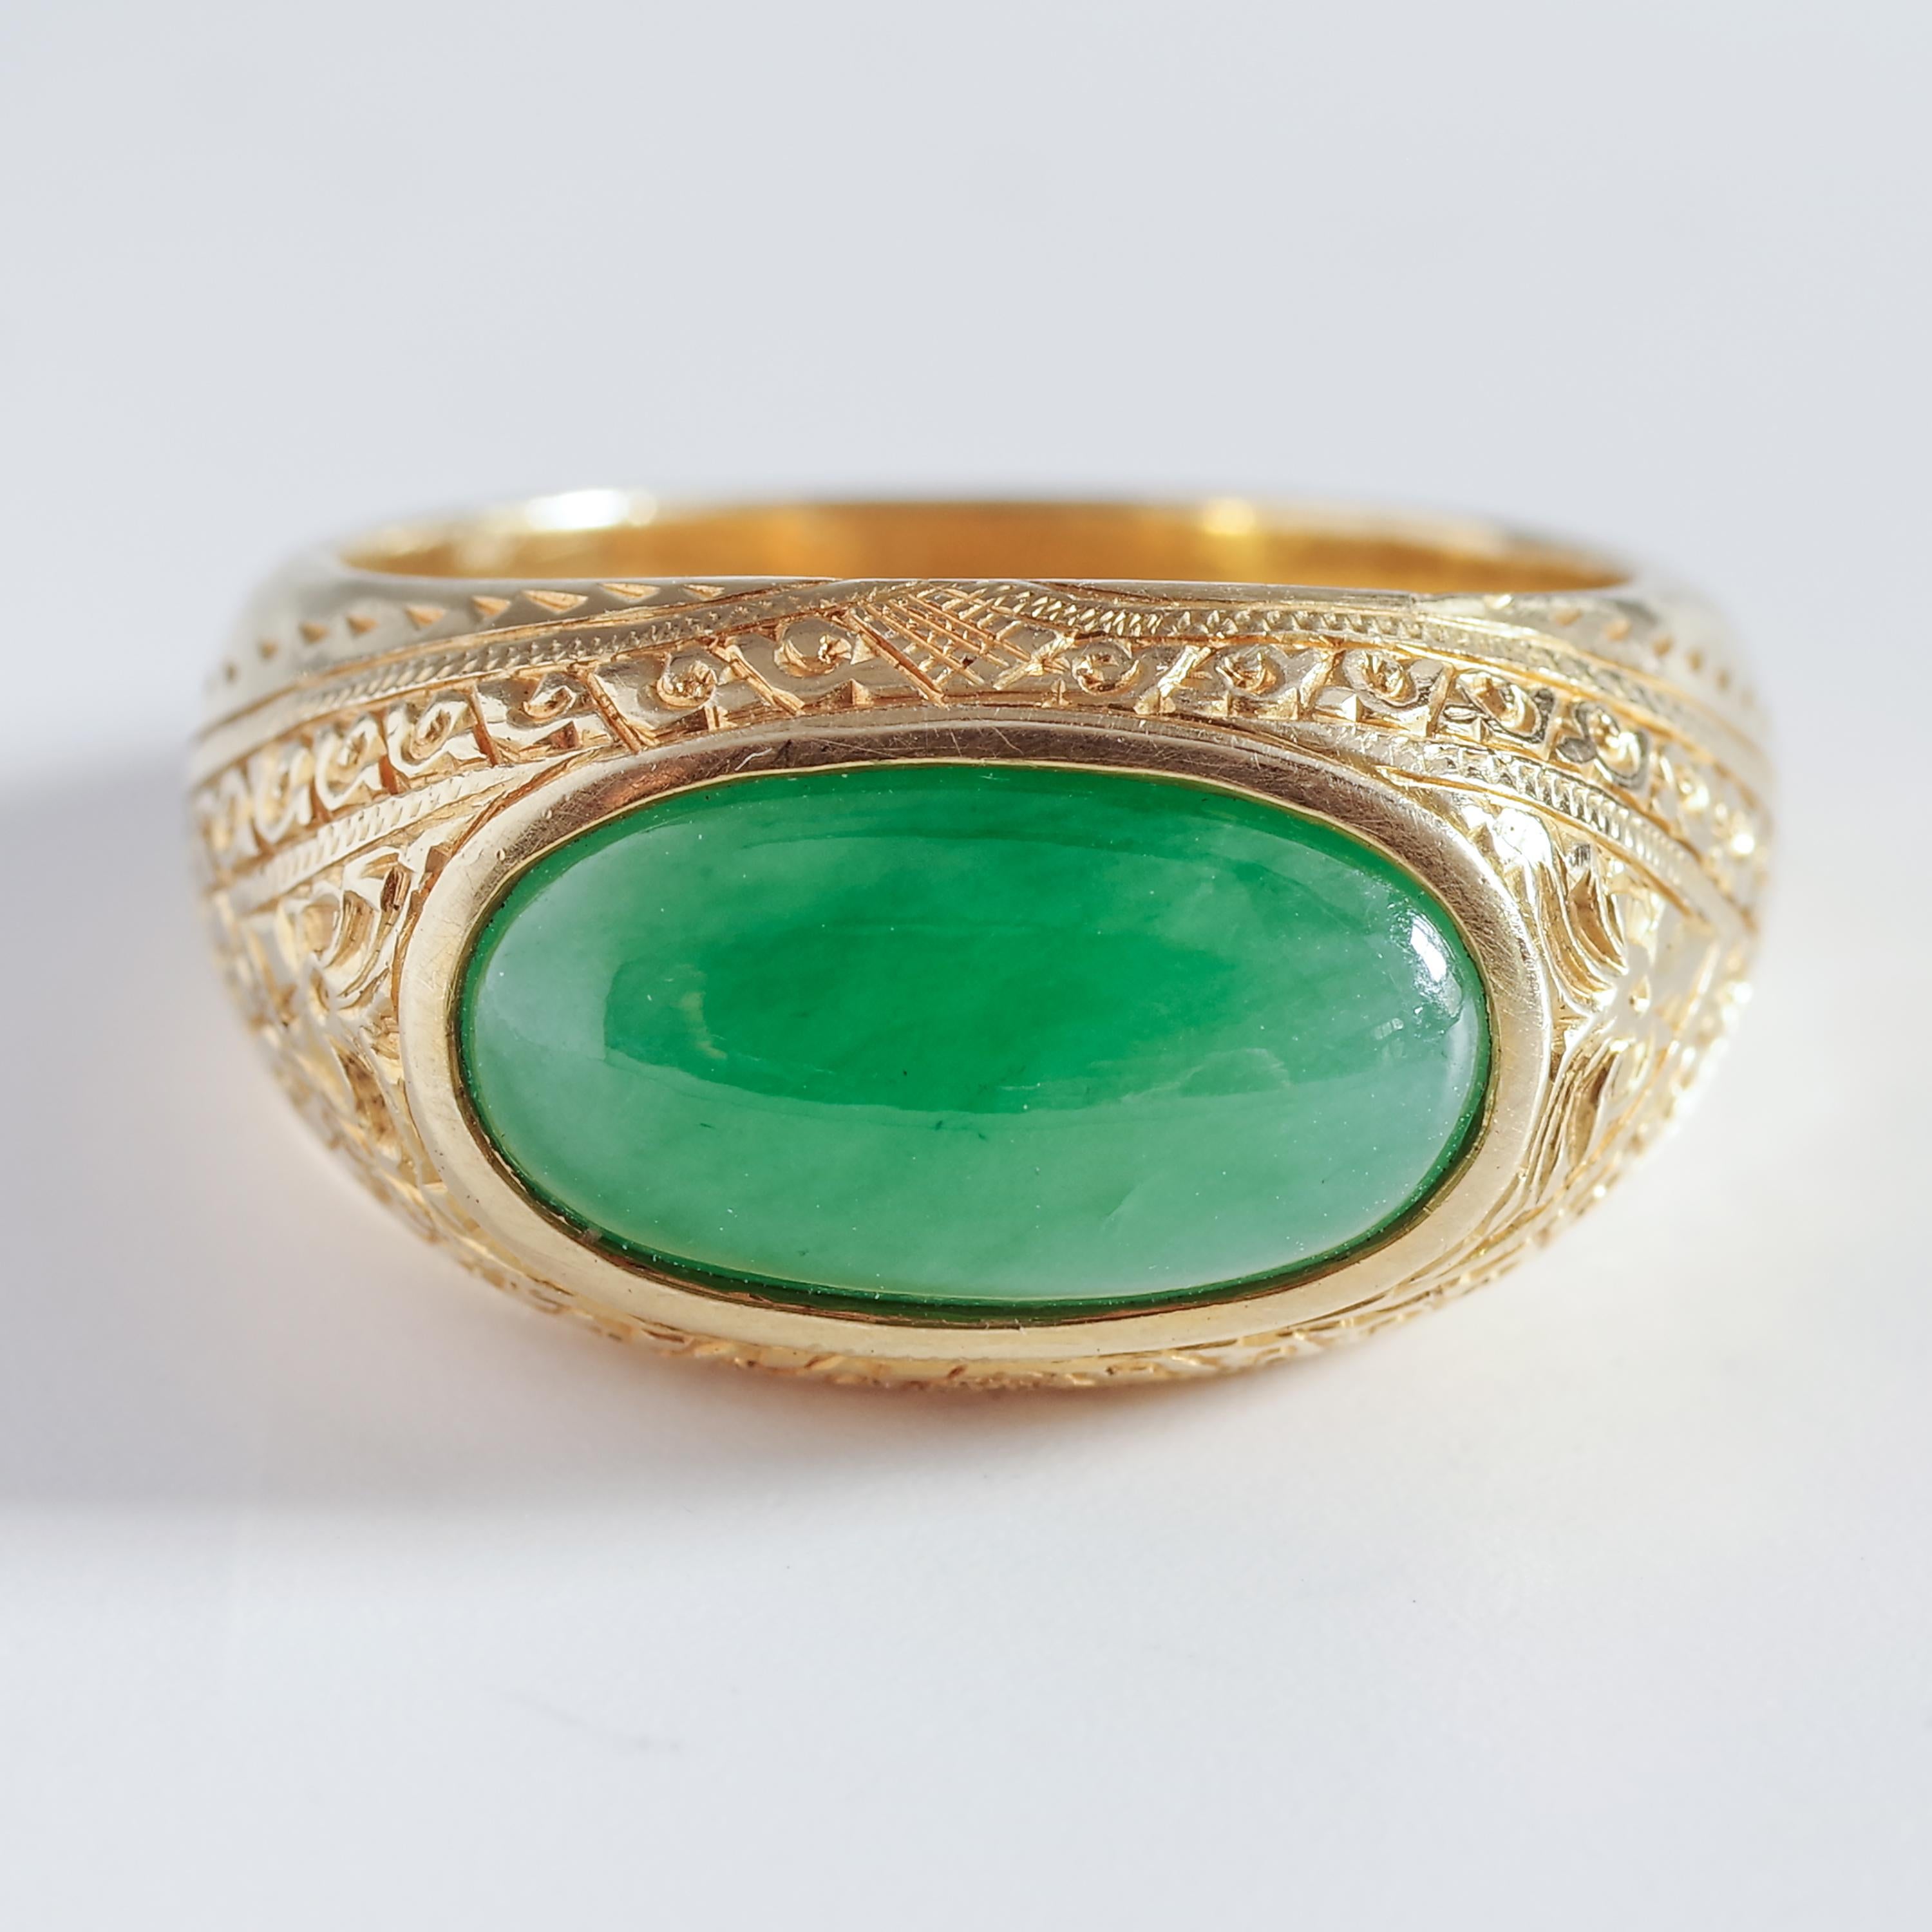 A luminous, hand-formed natural and untreated 15.5 mm x 8.6 mm Burmese jadeite jade cabochon in apple green is bezel-set within this satisfyingly weighty and solid rich yellow gold band that is unmarked but tests higher than 18-karat (though I'm